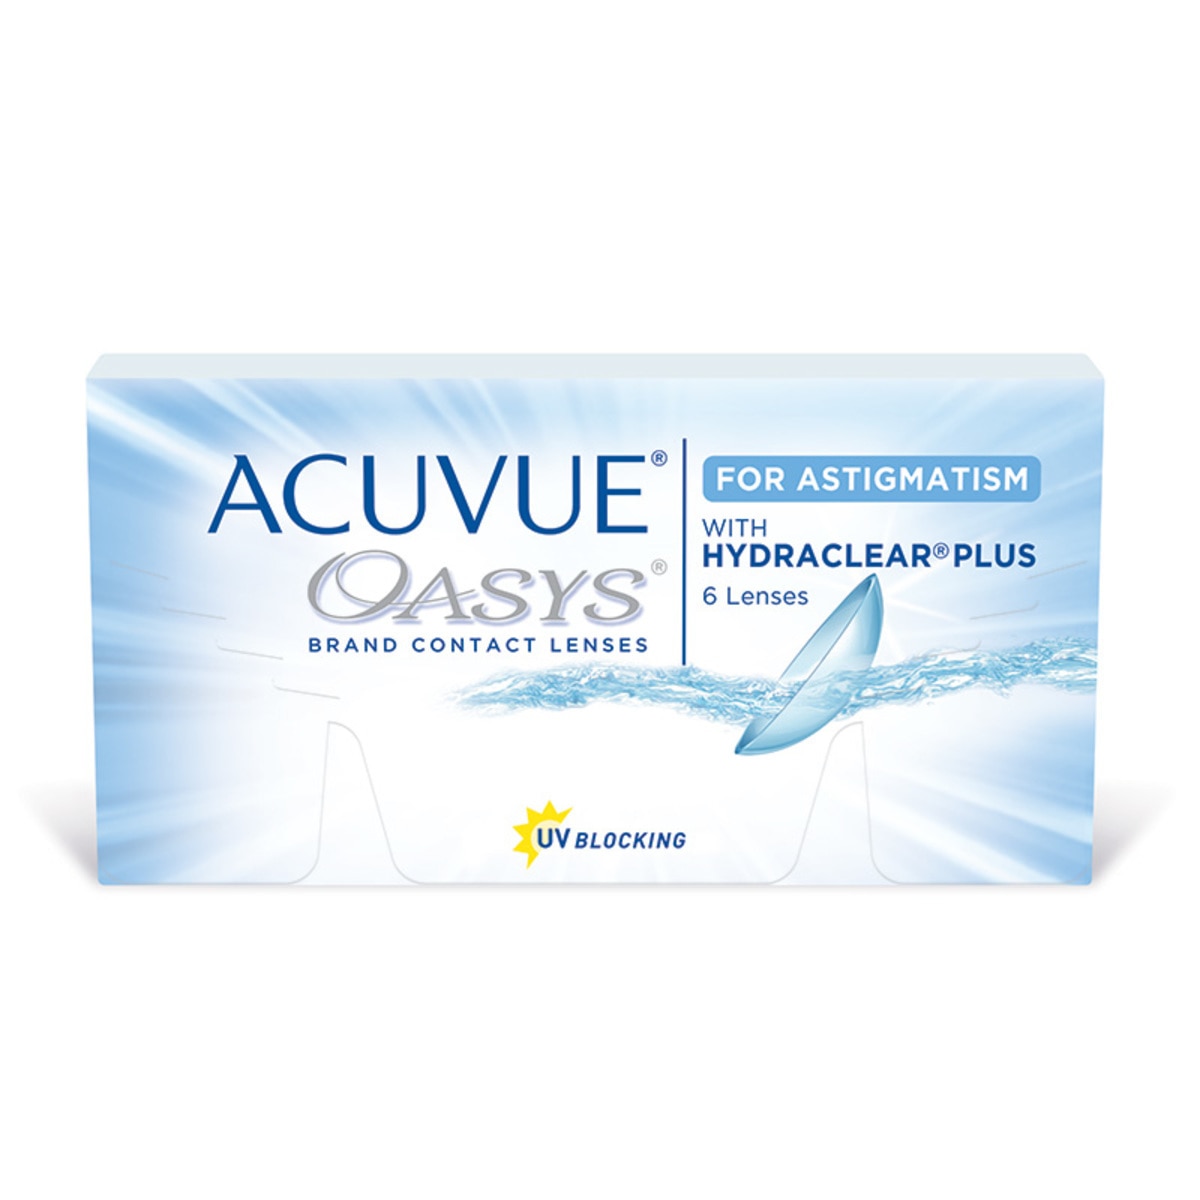 ACUVUE OASYS® con HYDRACLEAR Plus® para Astigmatismo (D 0, Cyl/Axis -2.25/20)